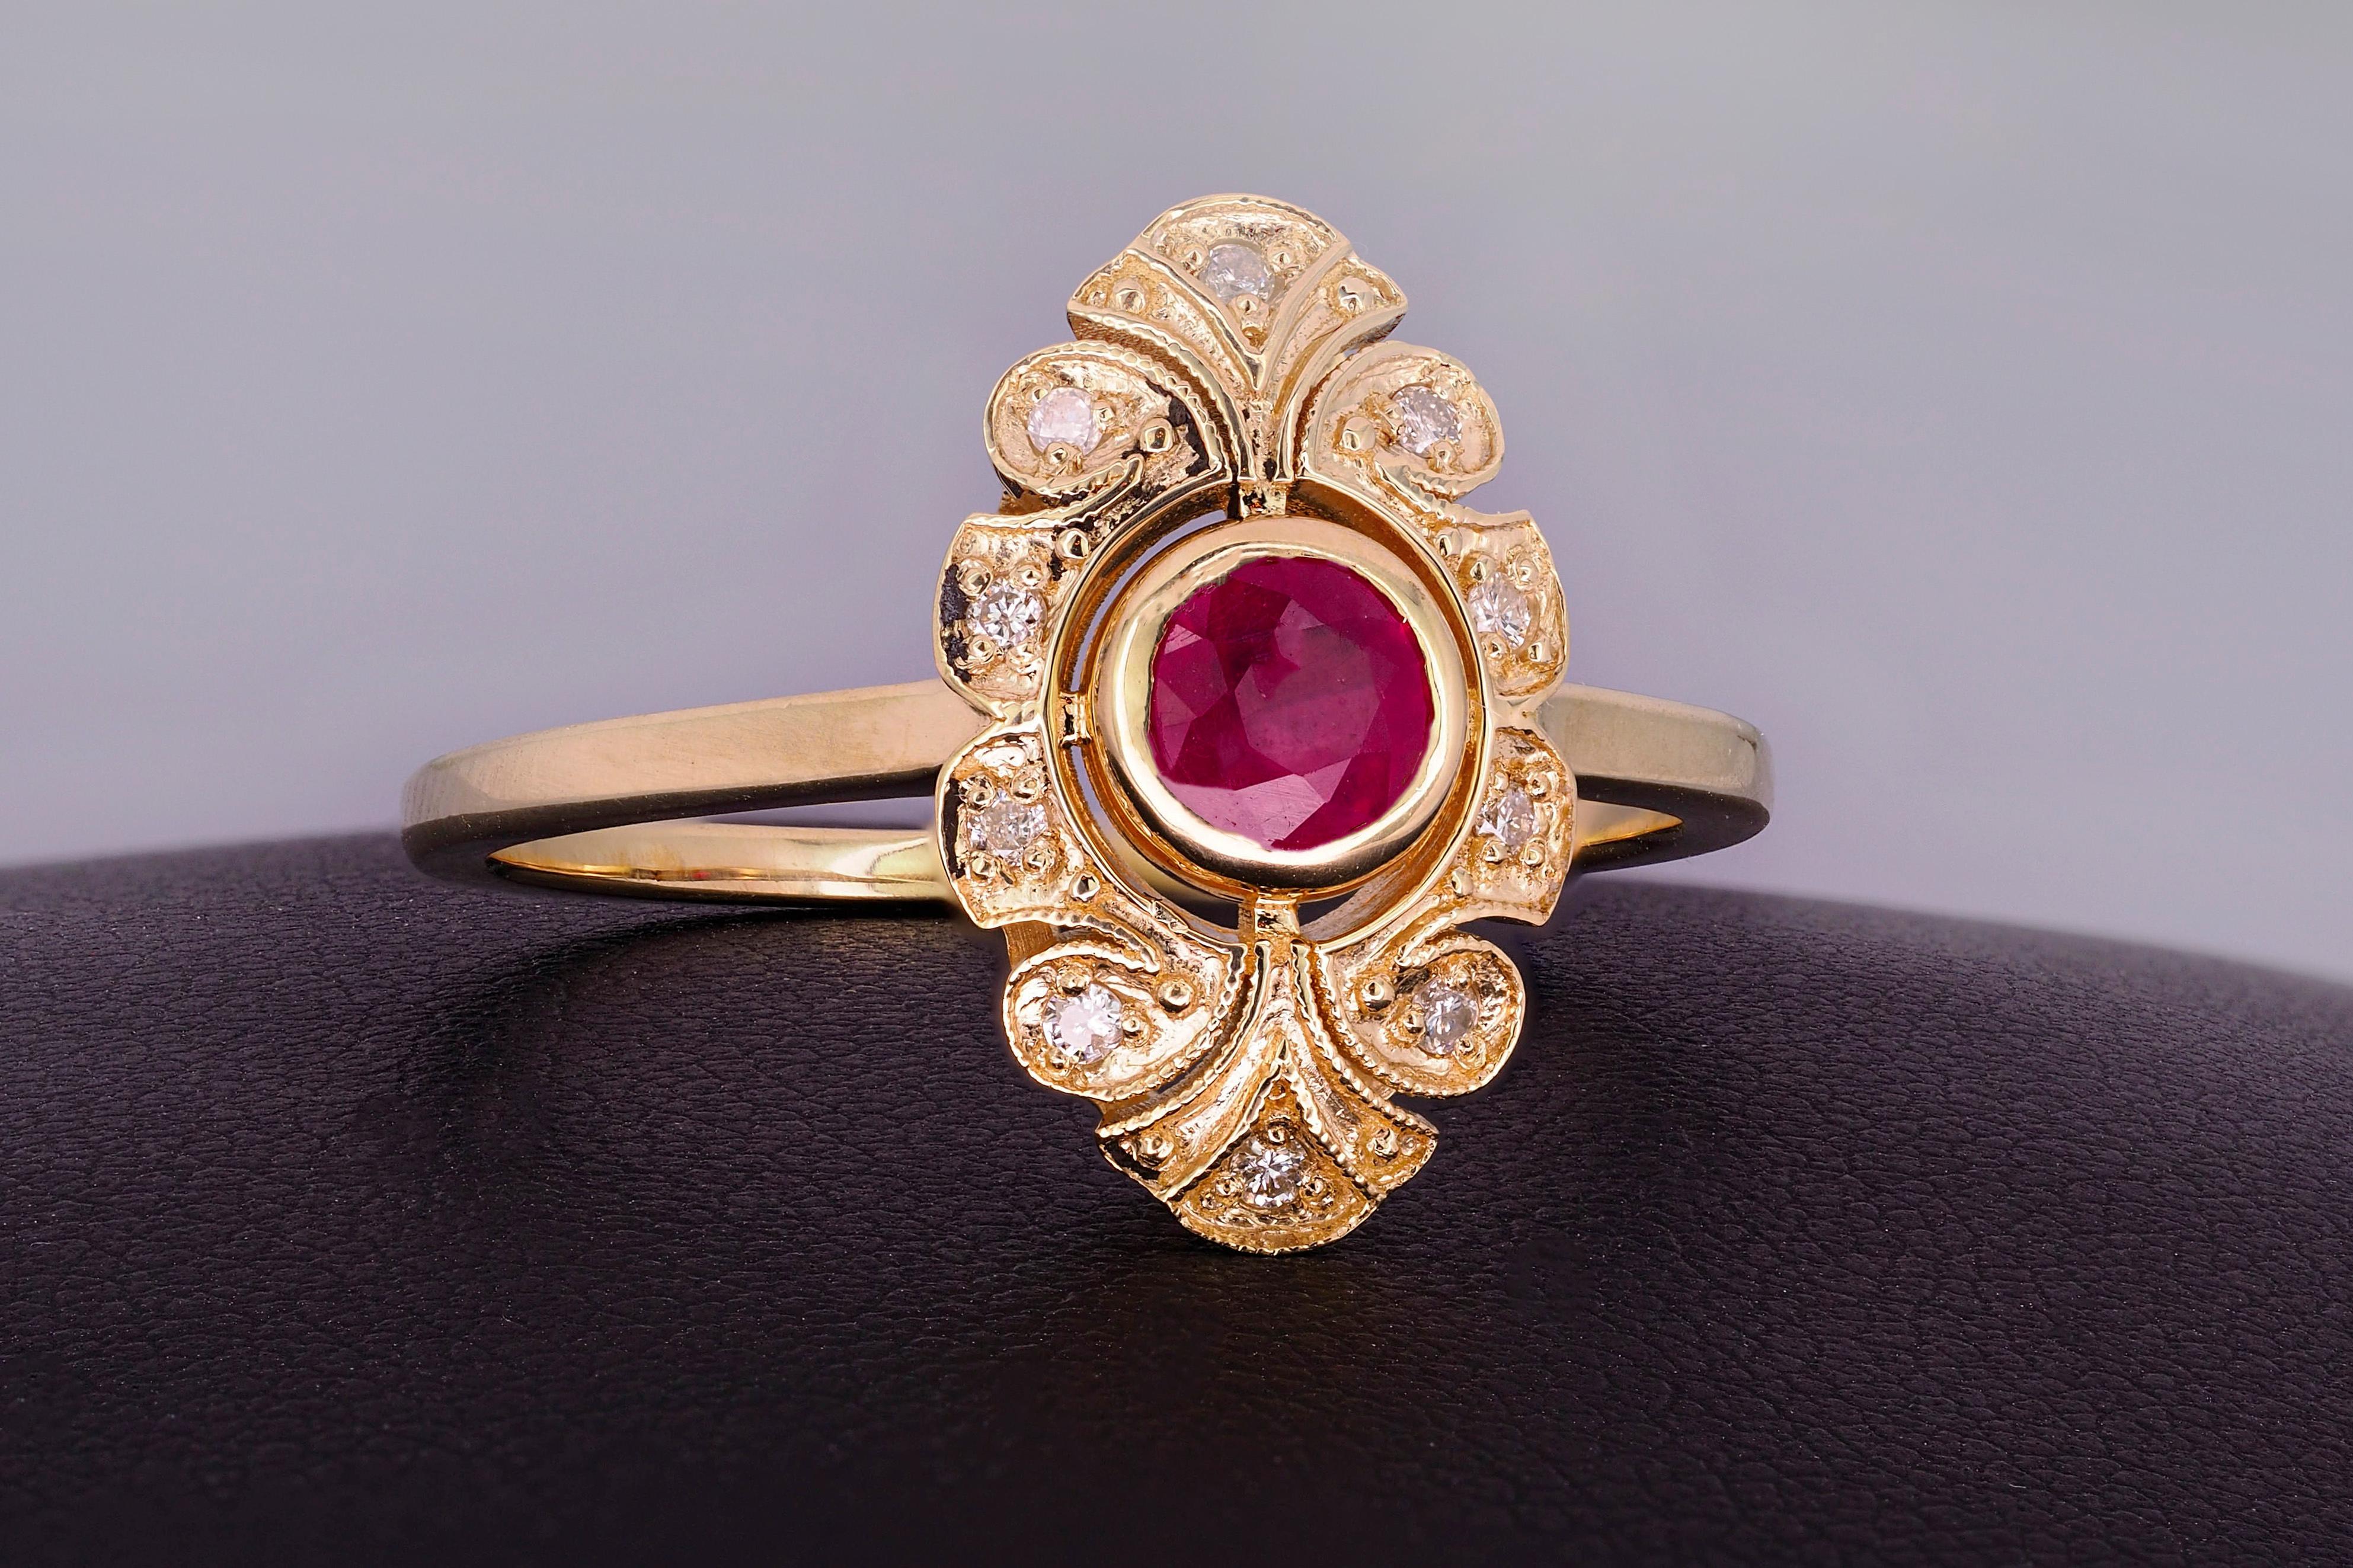 For Sale:  14 karat Gold Ring with Ruby and Diamonds, Vintage Inspired Ring.  7